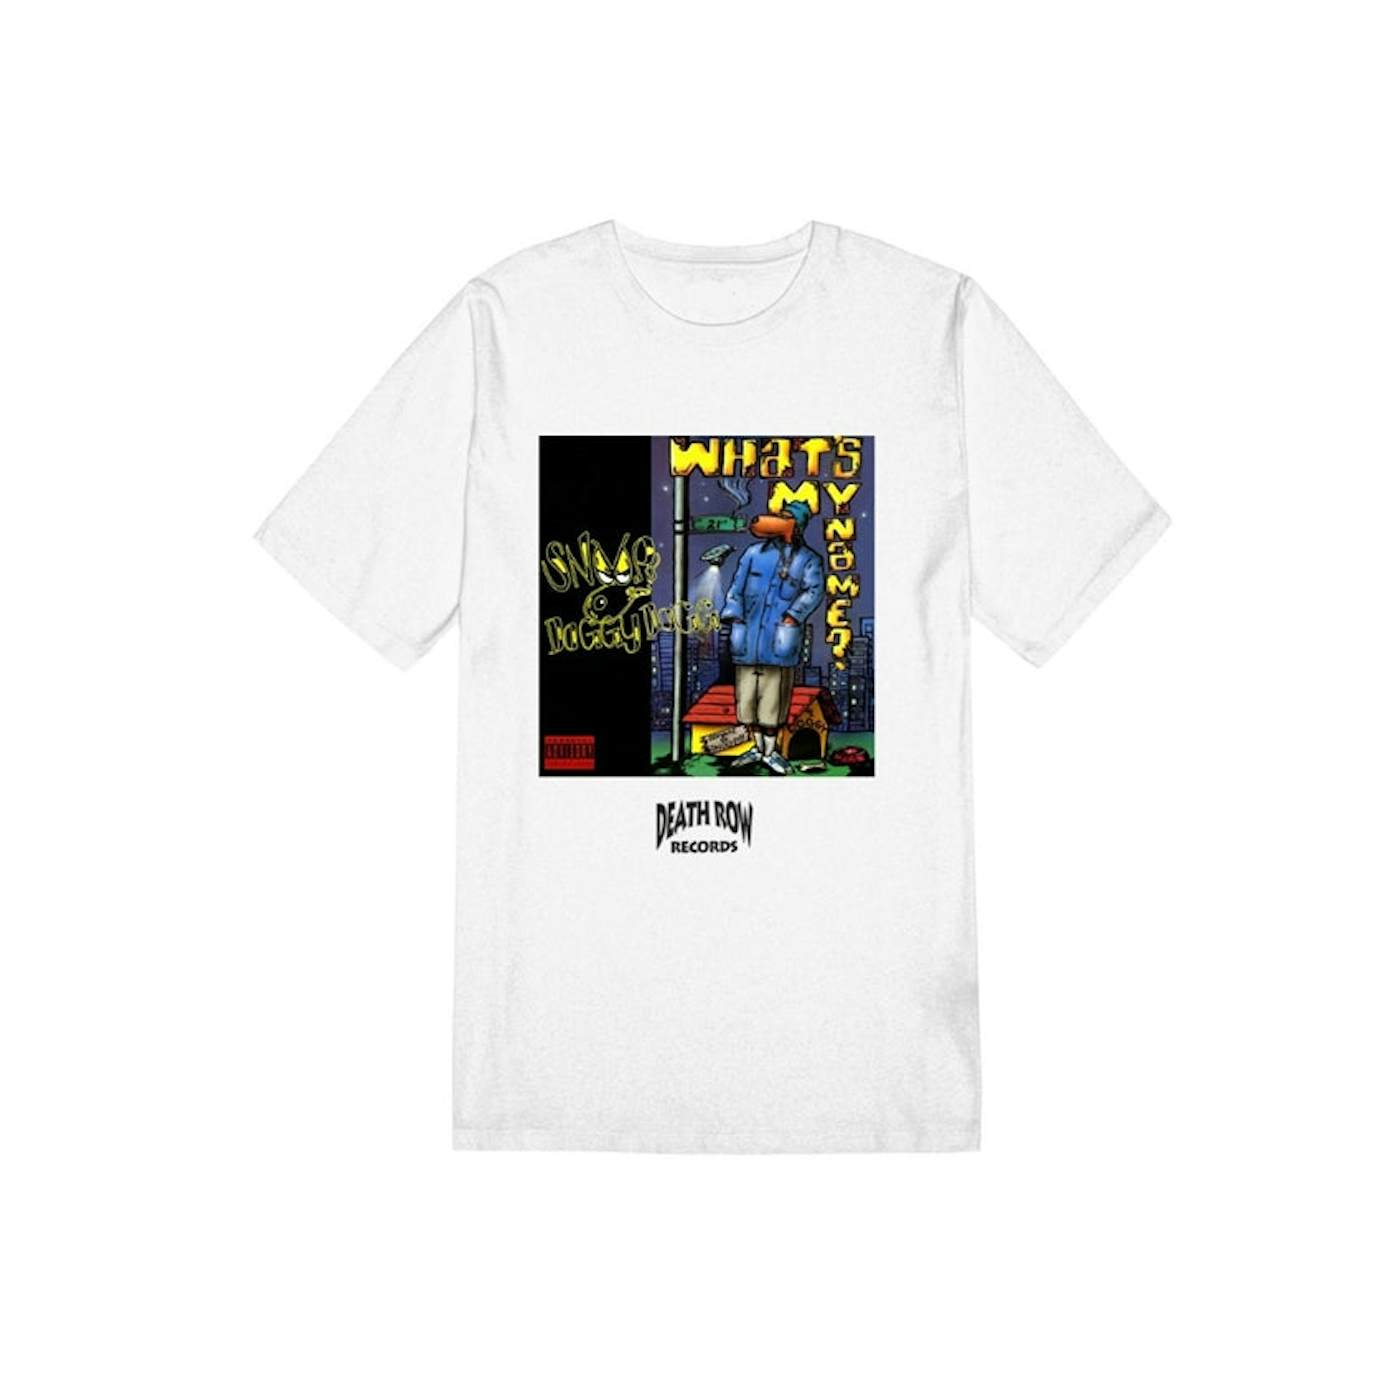 Death Row Records T Shirt - Snoop Dogg (White)